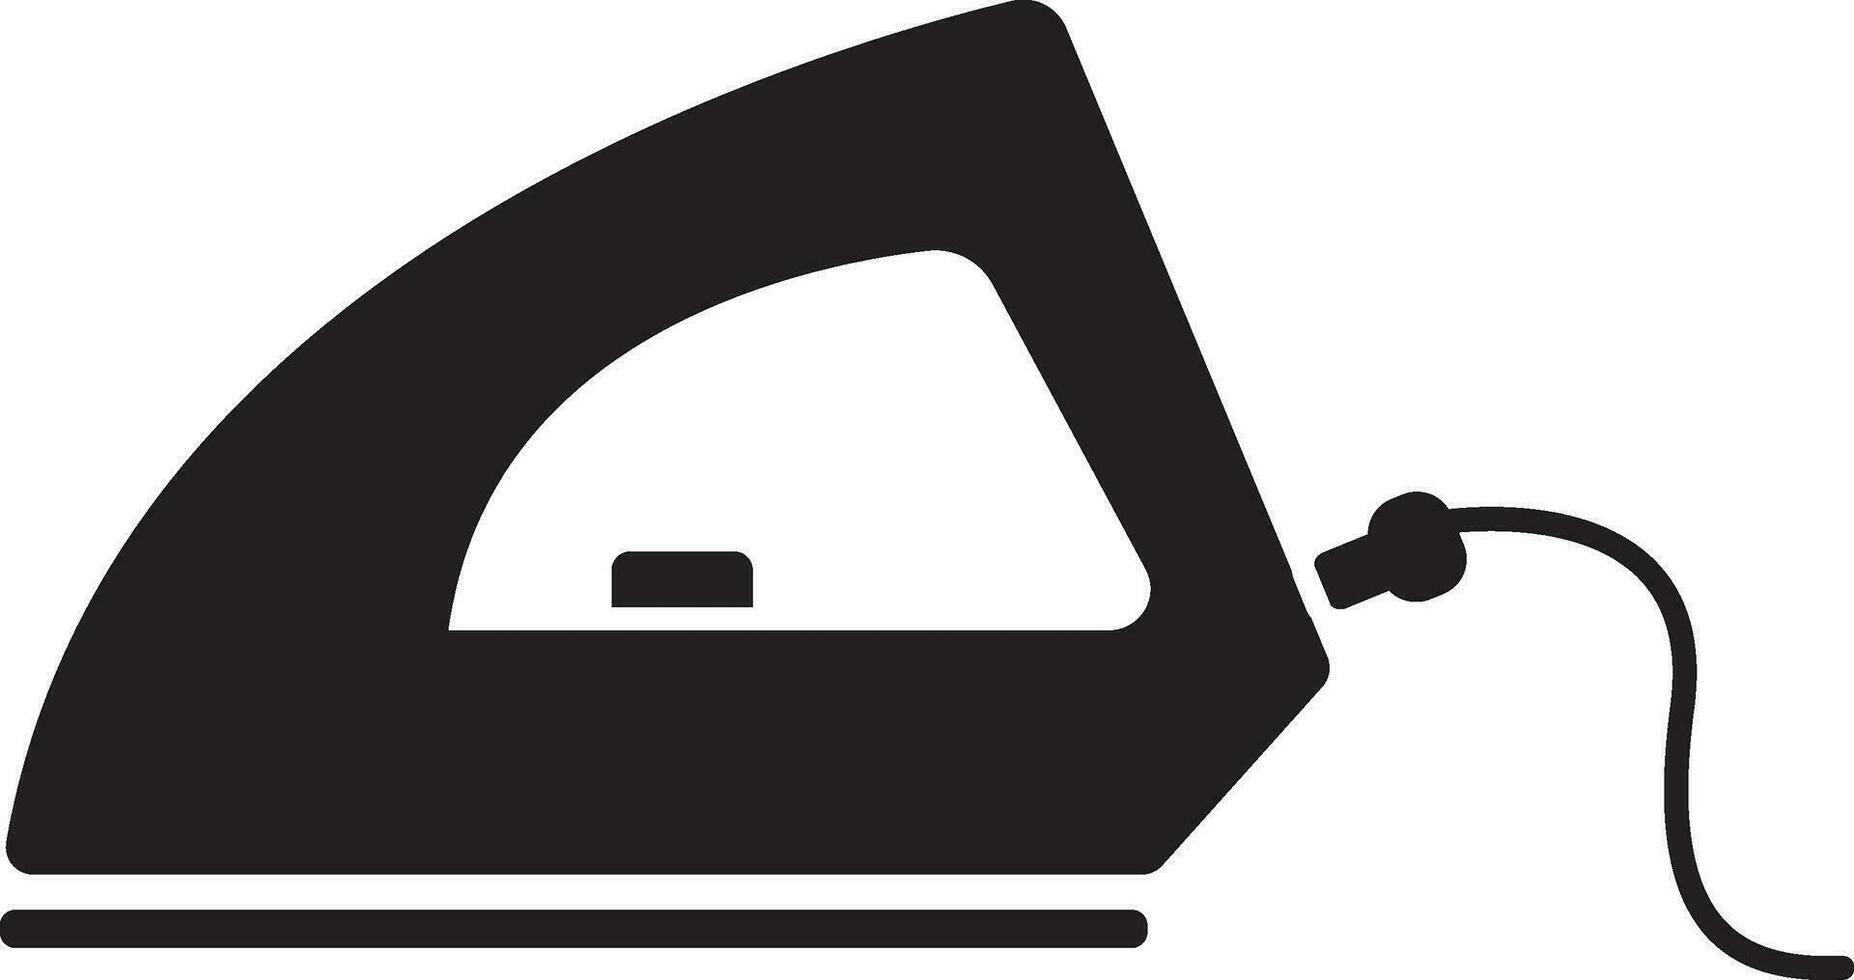 Illustration of steam iron icon in flat style. vector